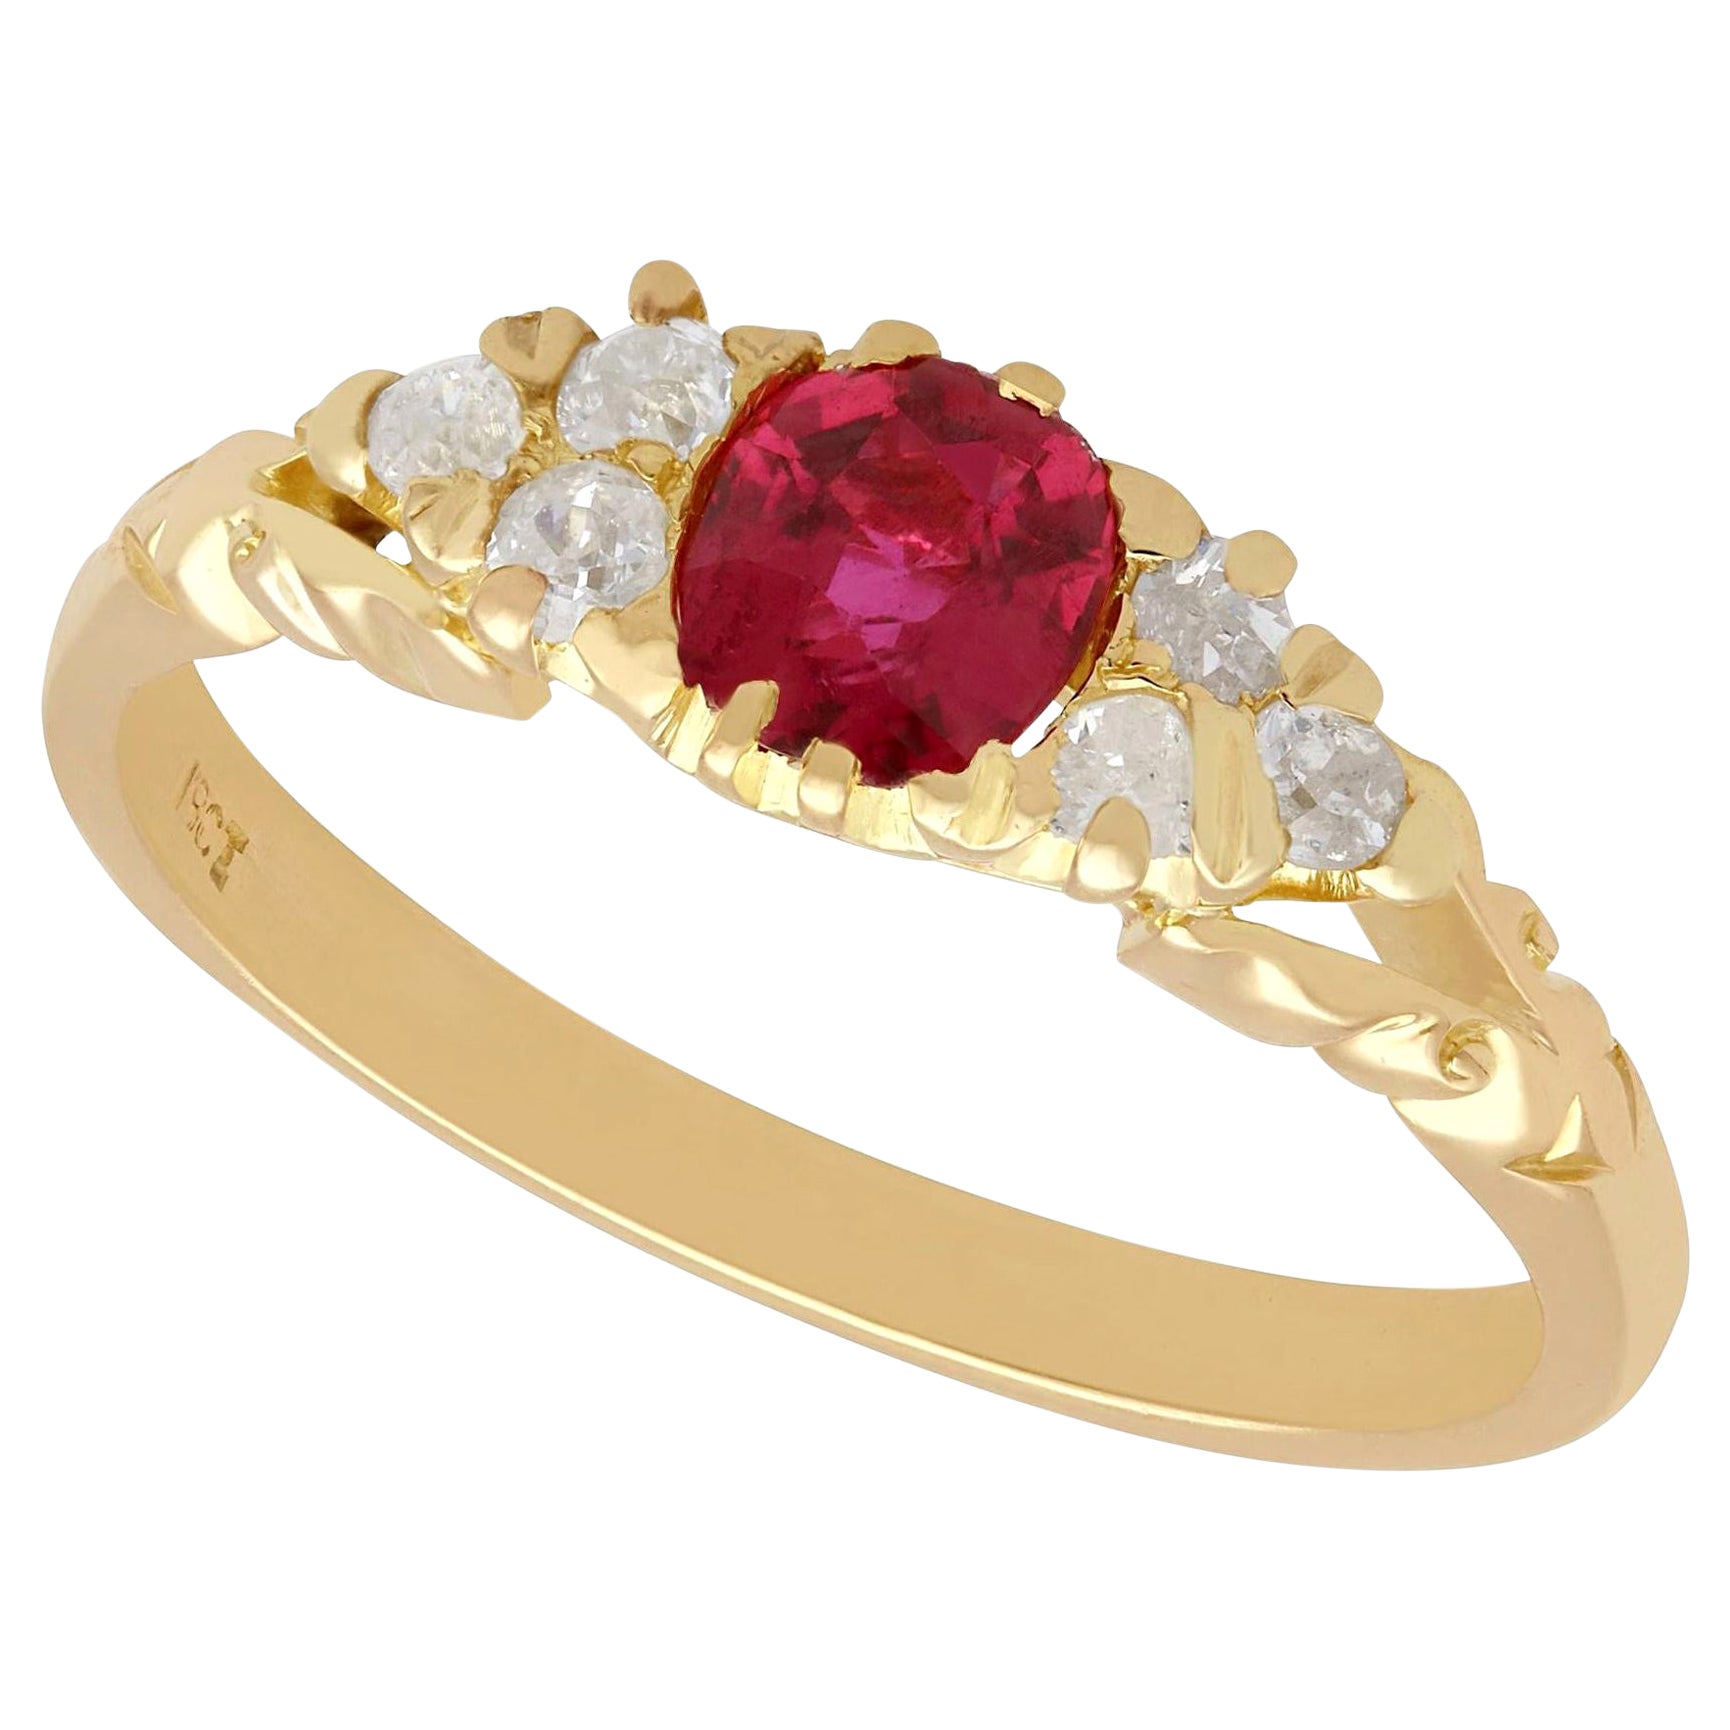 Antique Ruby and Diamond Yellow Gold Cocktail Ring, circa 1910